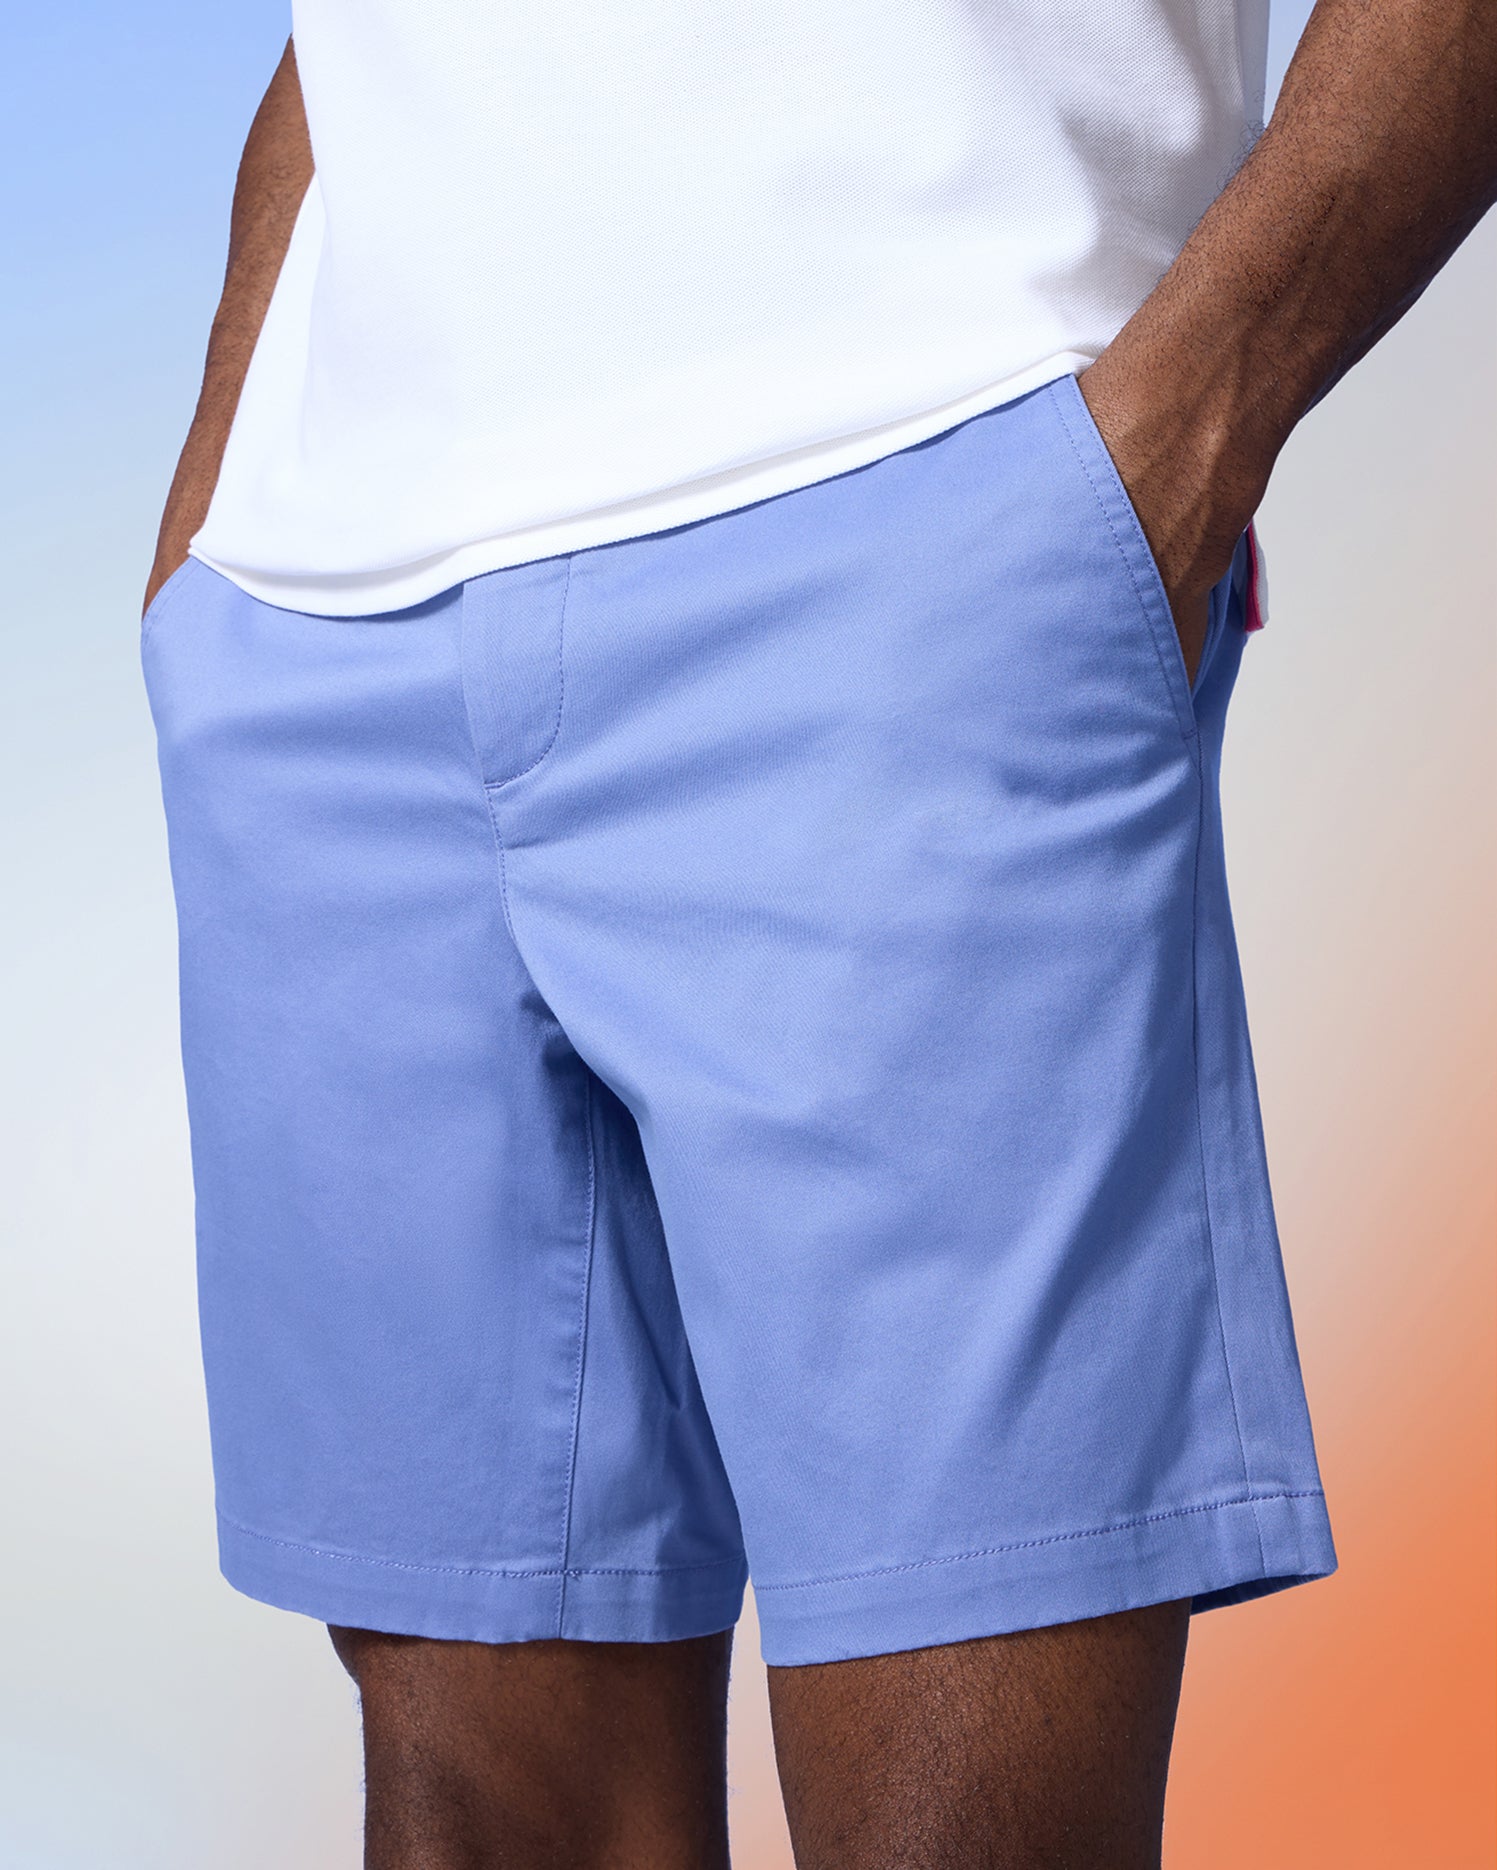 A person stands with their hands in the pockets of vibrant blue Psycho Bunny MENS YORK CHINO SHORT - B6R357B200, wearing a white t-shirt. The background features a gradient of pastel colors, blending from blue to orange.